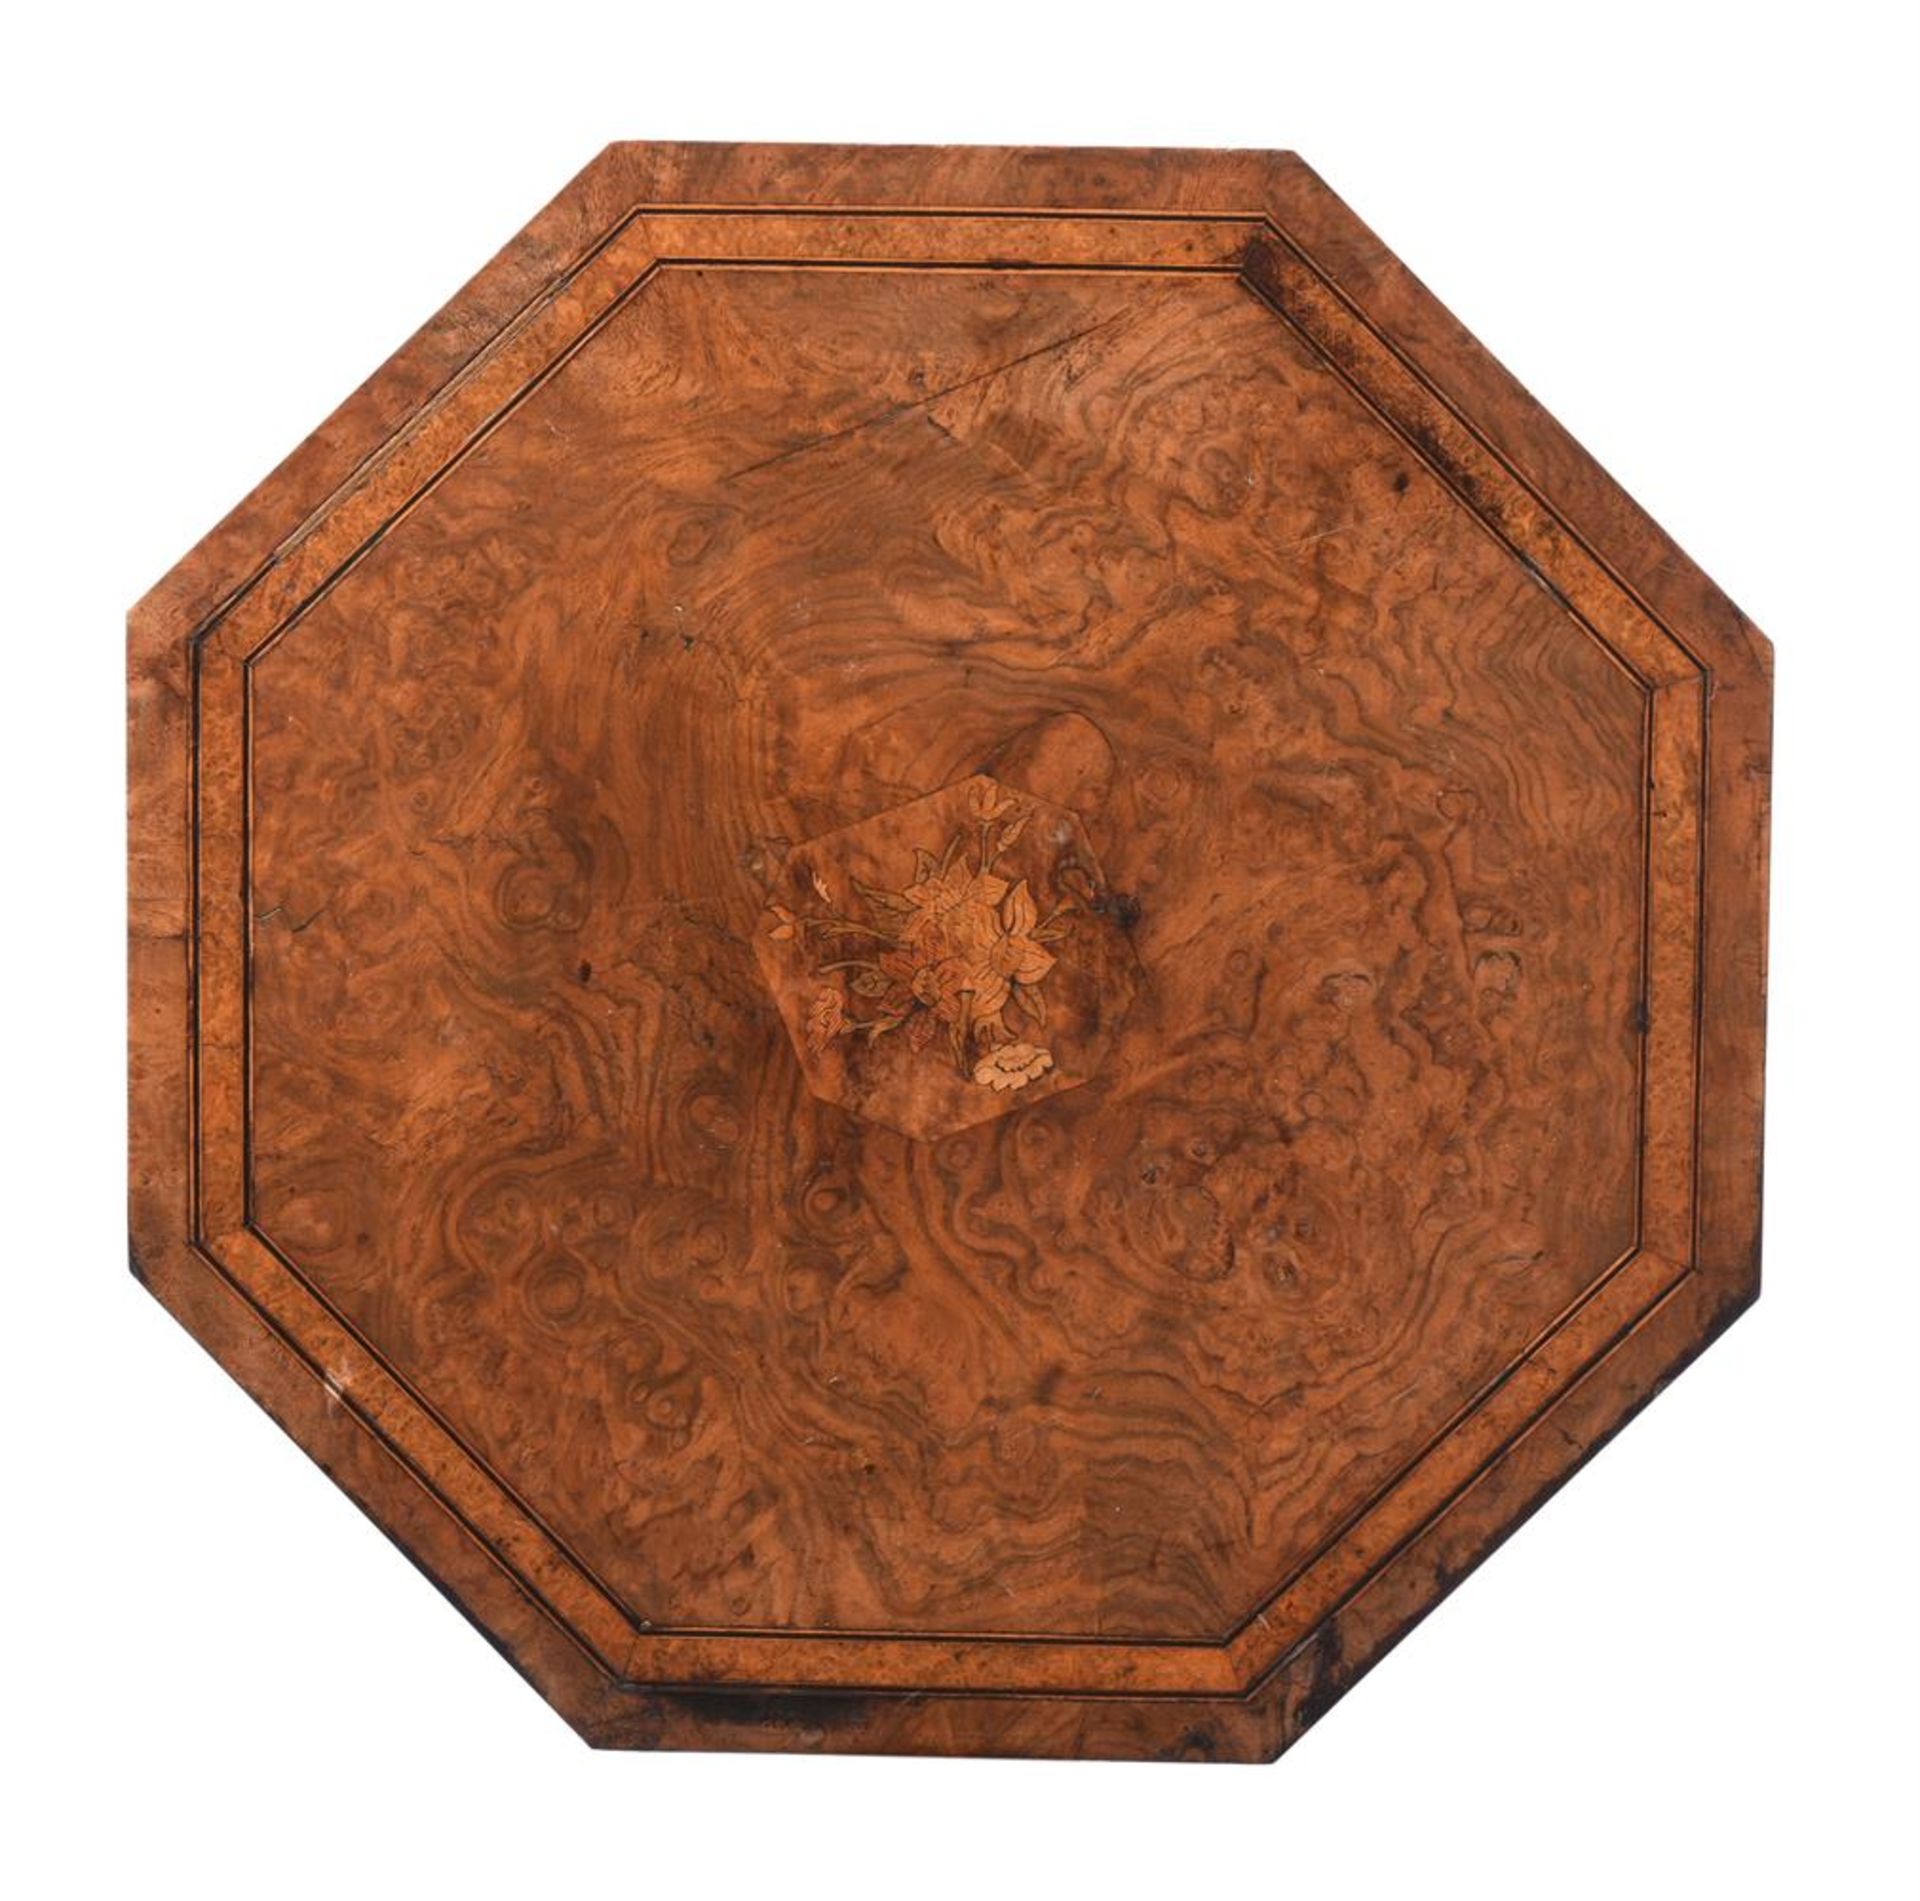 A BURR WALNUT AND MARQUETRY OCTAGONAL TABLE, 19TH CENTURY - Image 2 of 3